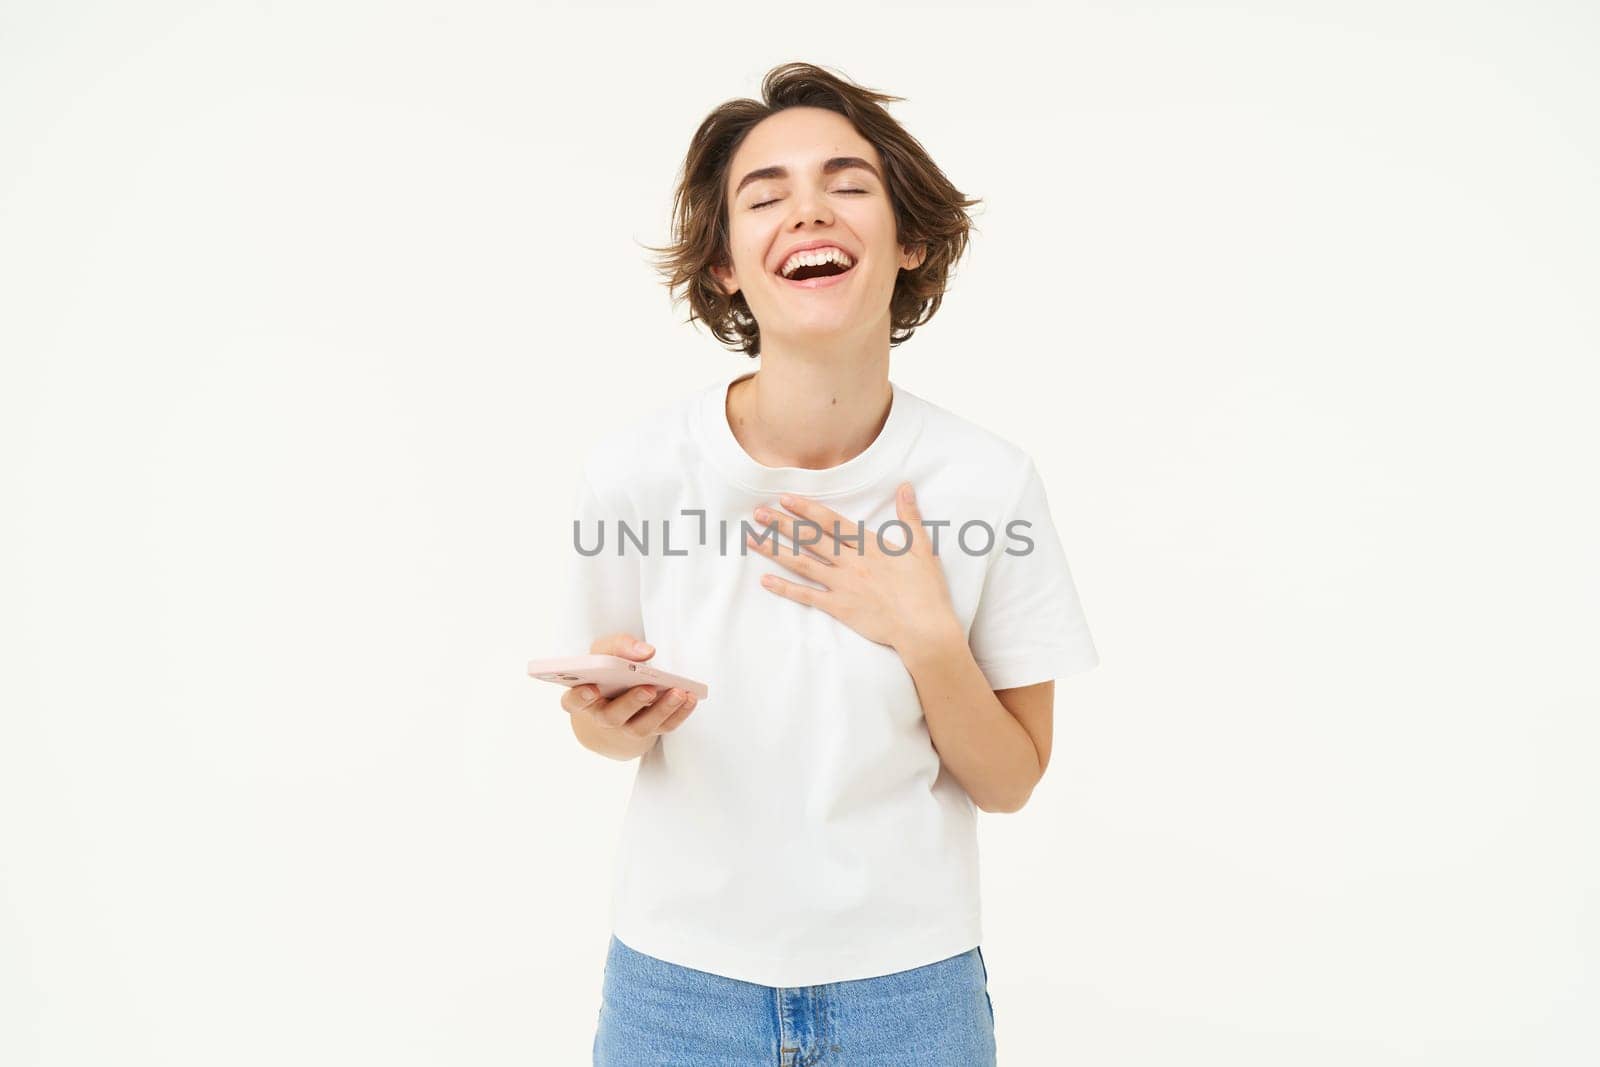 Portrait of young brunette woman texting, sending a message on telephone, using mobile phone and smiling, standing over white studio background.